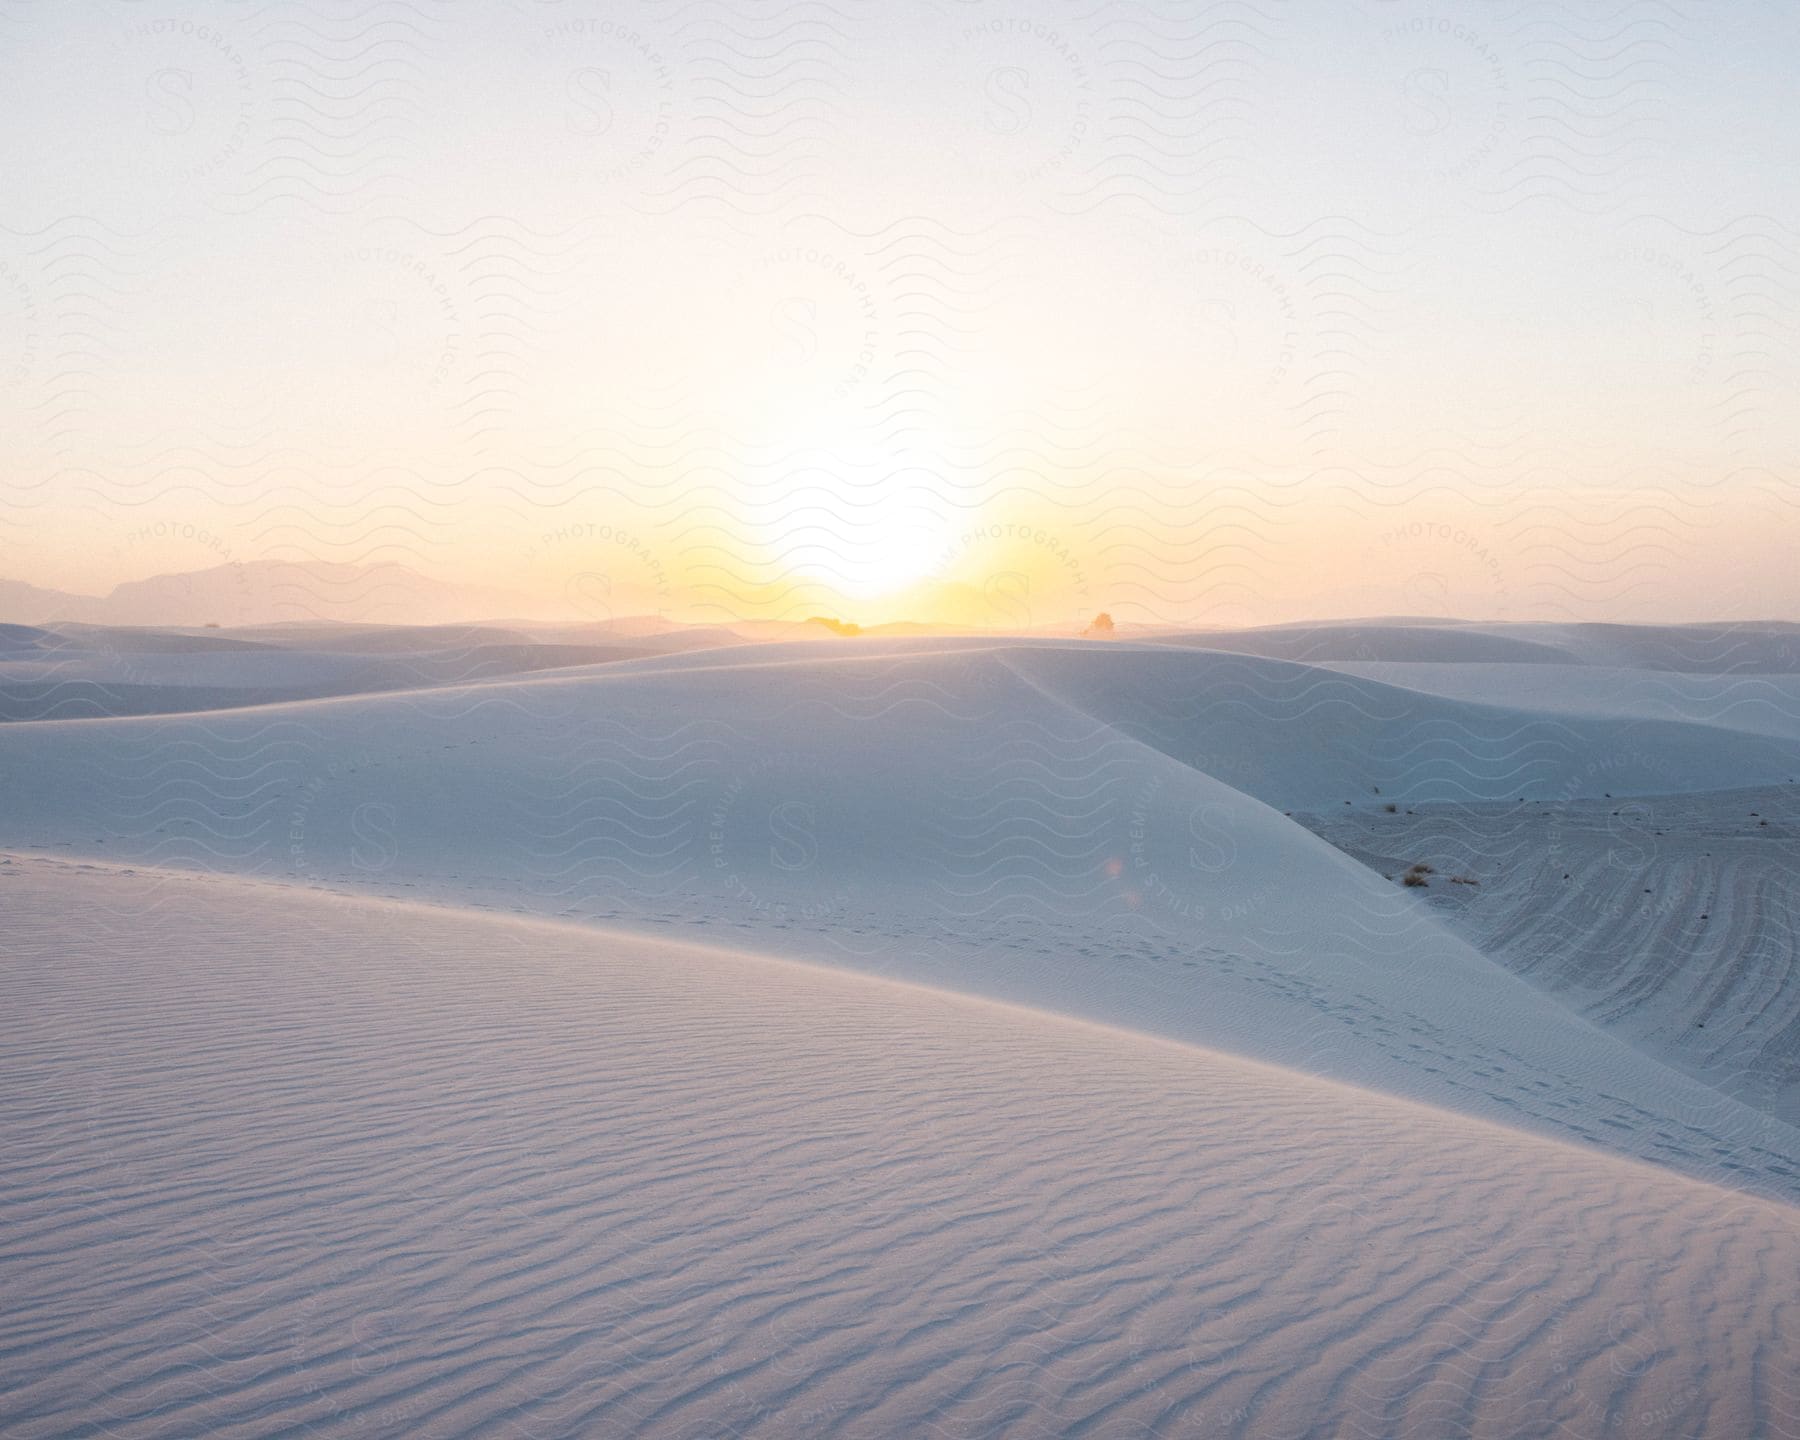 A view of the desert with some large sand dunes